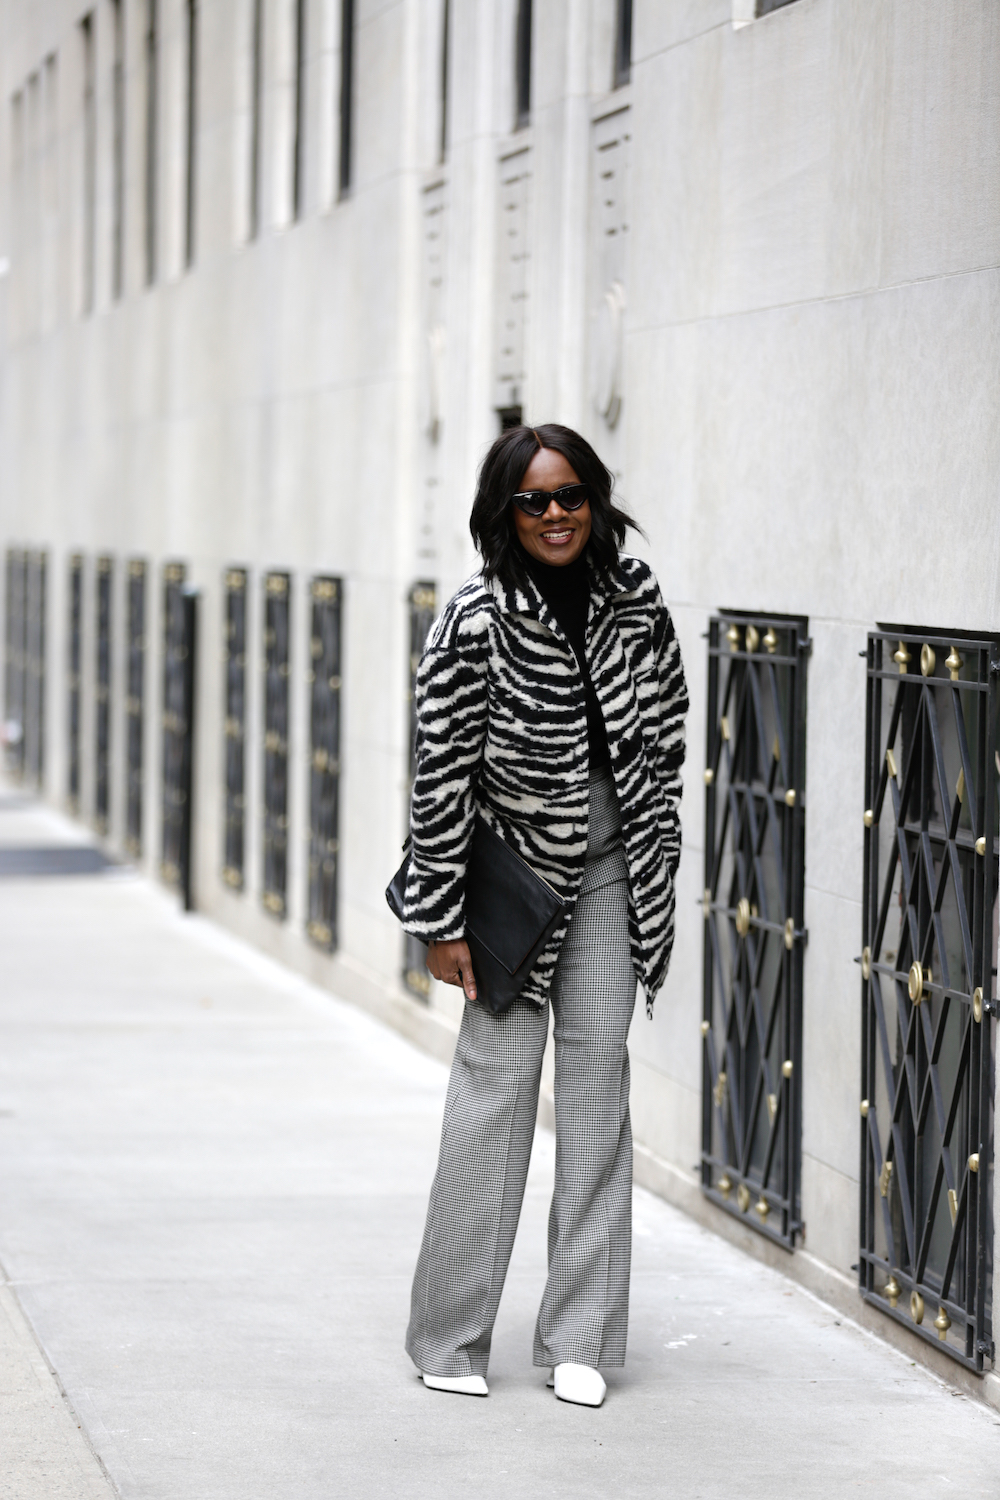 Chic outfits, Barn Jackets, Black and white Car Coats